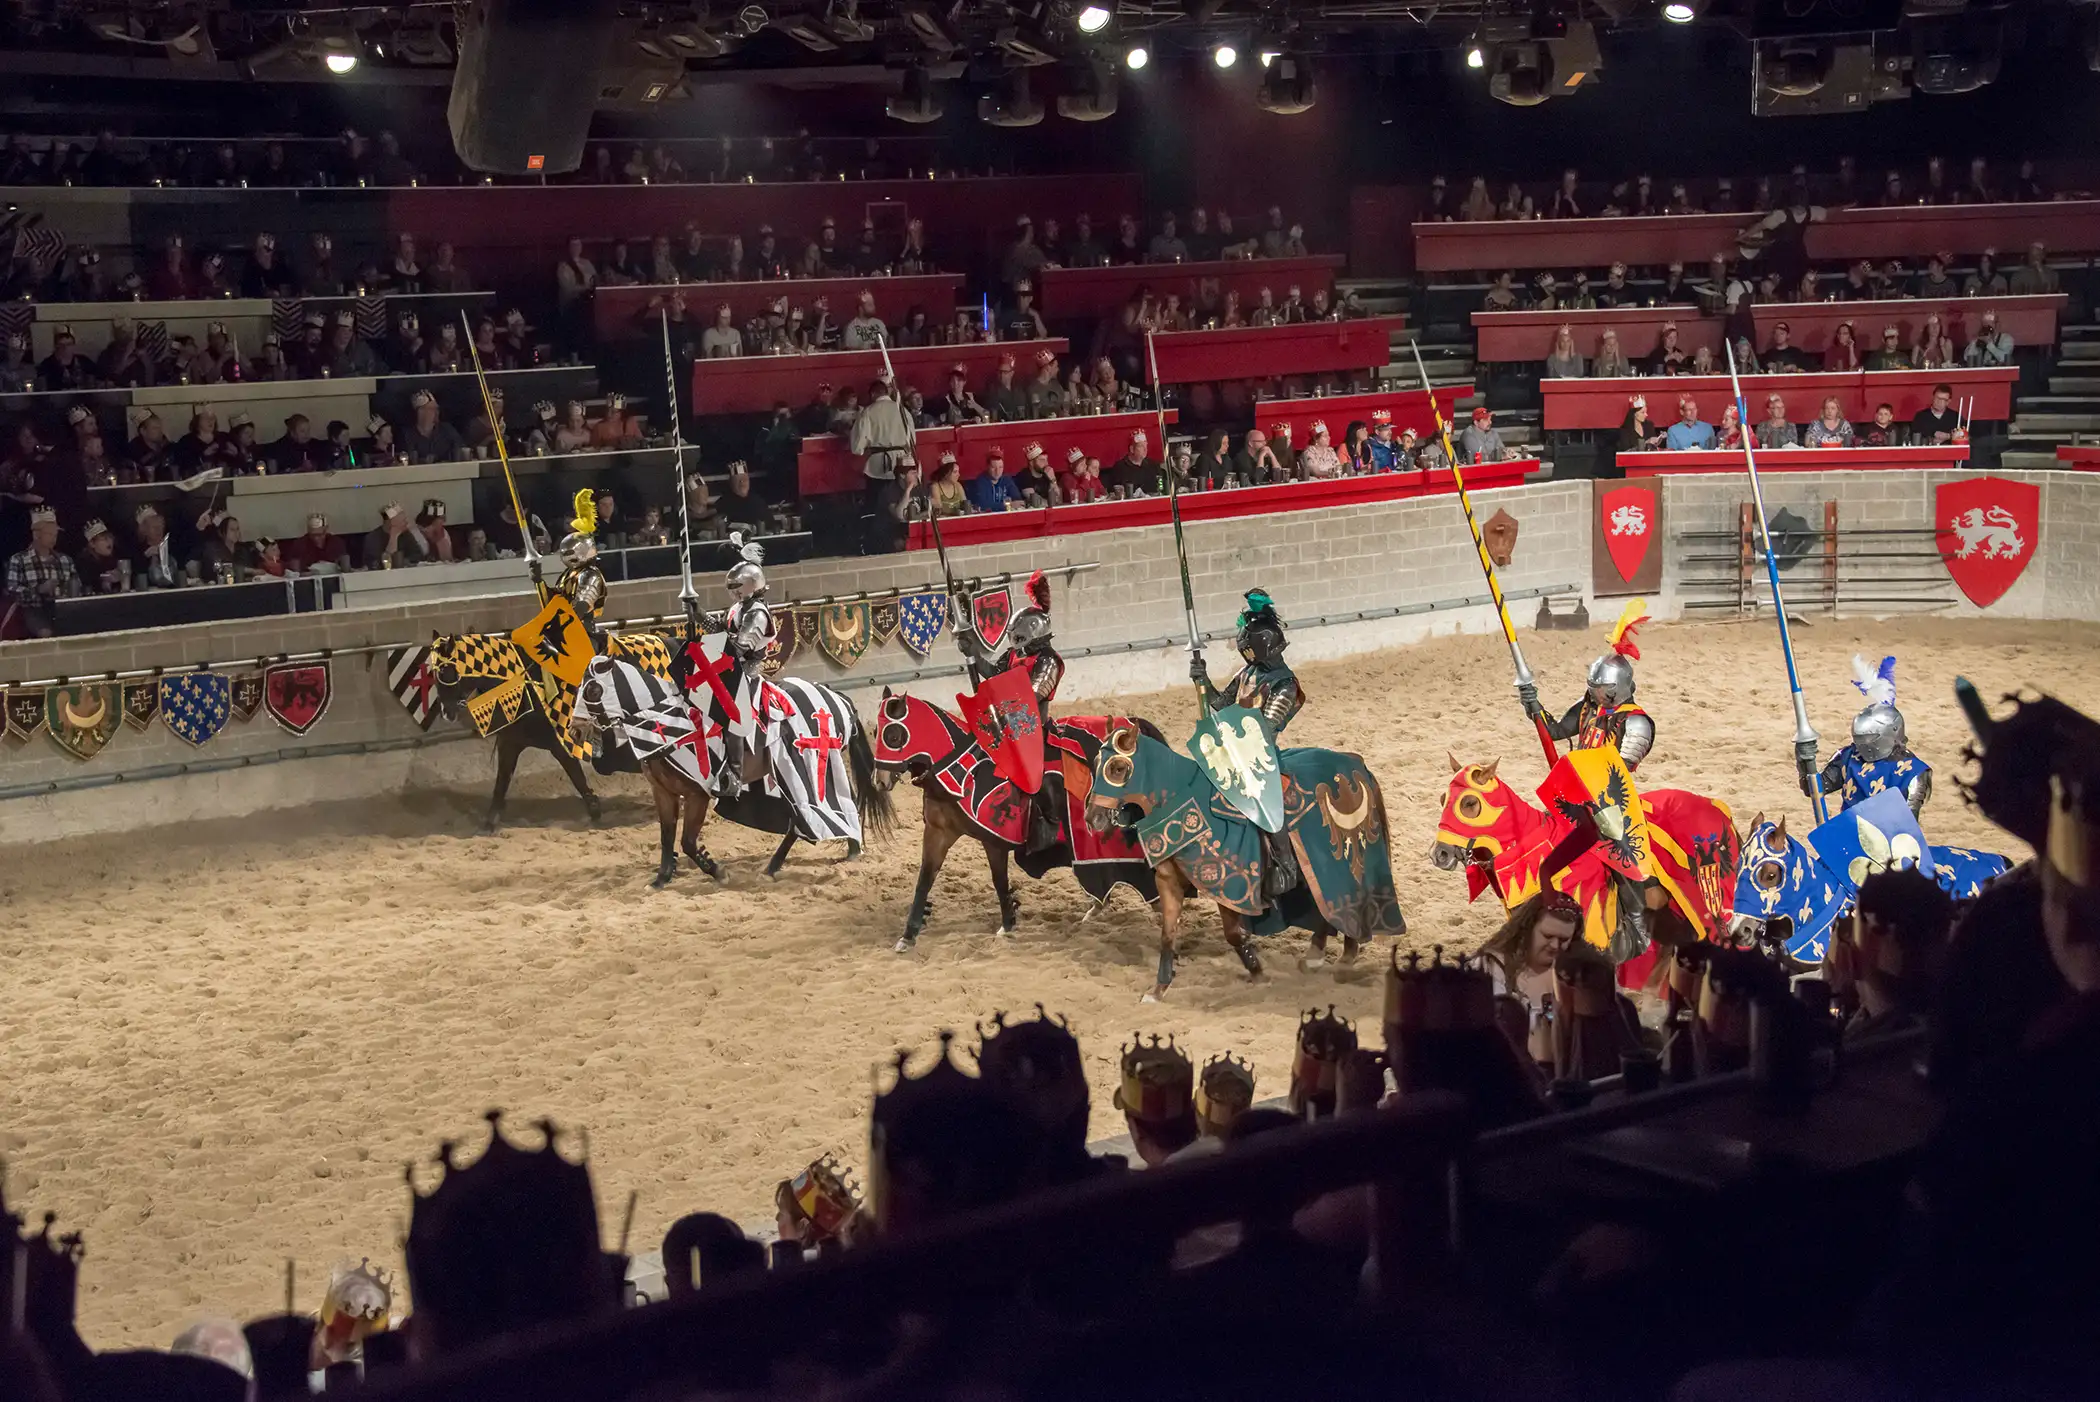 Medieval Times Restaurant: Six horsemen at a jousting event, dressed as medieval knights holding lances, lined up in a stadium full of spectators, waiting to begin the show, Toronto, Ontario, March 21, 2015.